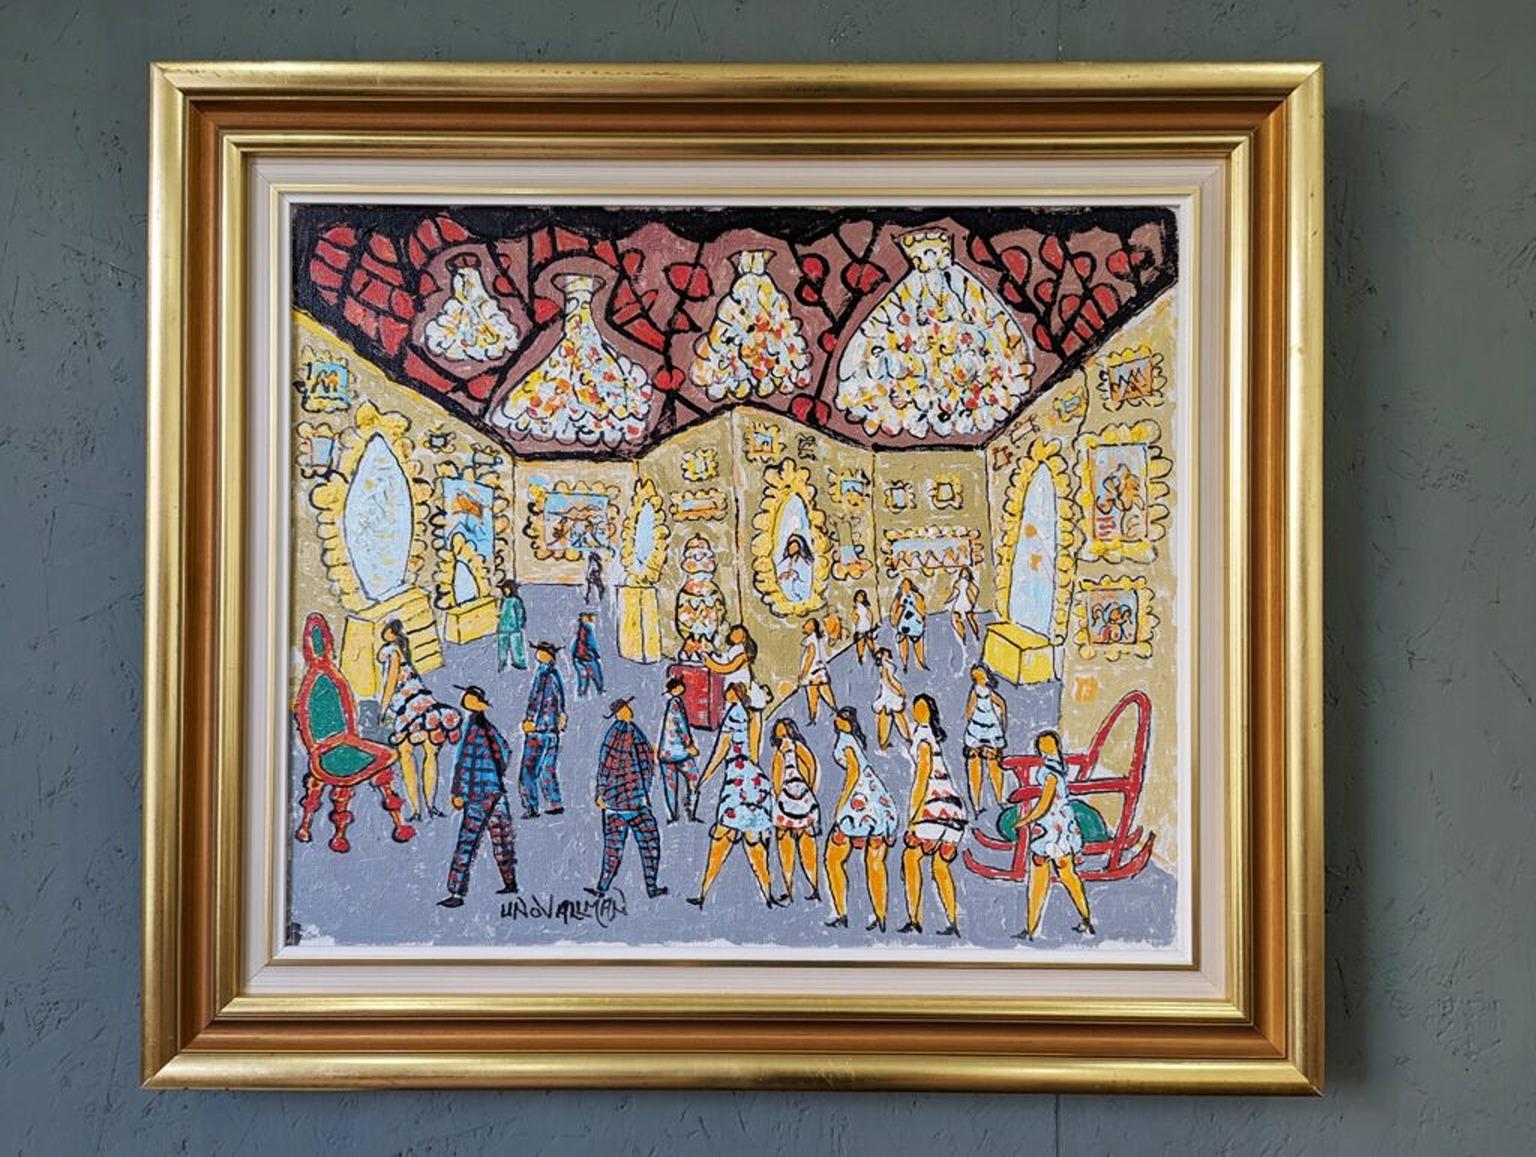 THE GALLERIES
Size: 61 x 70 cm (including frame)
Oil on canvas

A very lively and playful mid century composition in oil, painted by Swedish artist Uno Vallman (born 1913) whose works are included in the Swedish National Museum and The Swedish